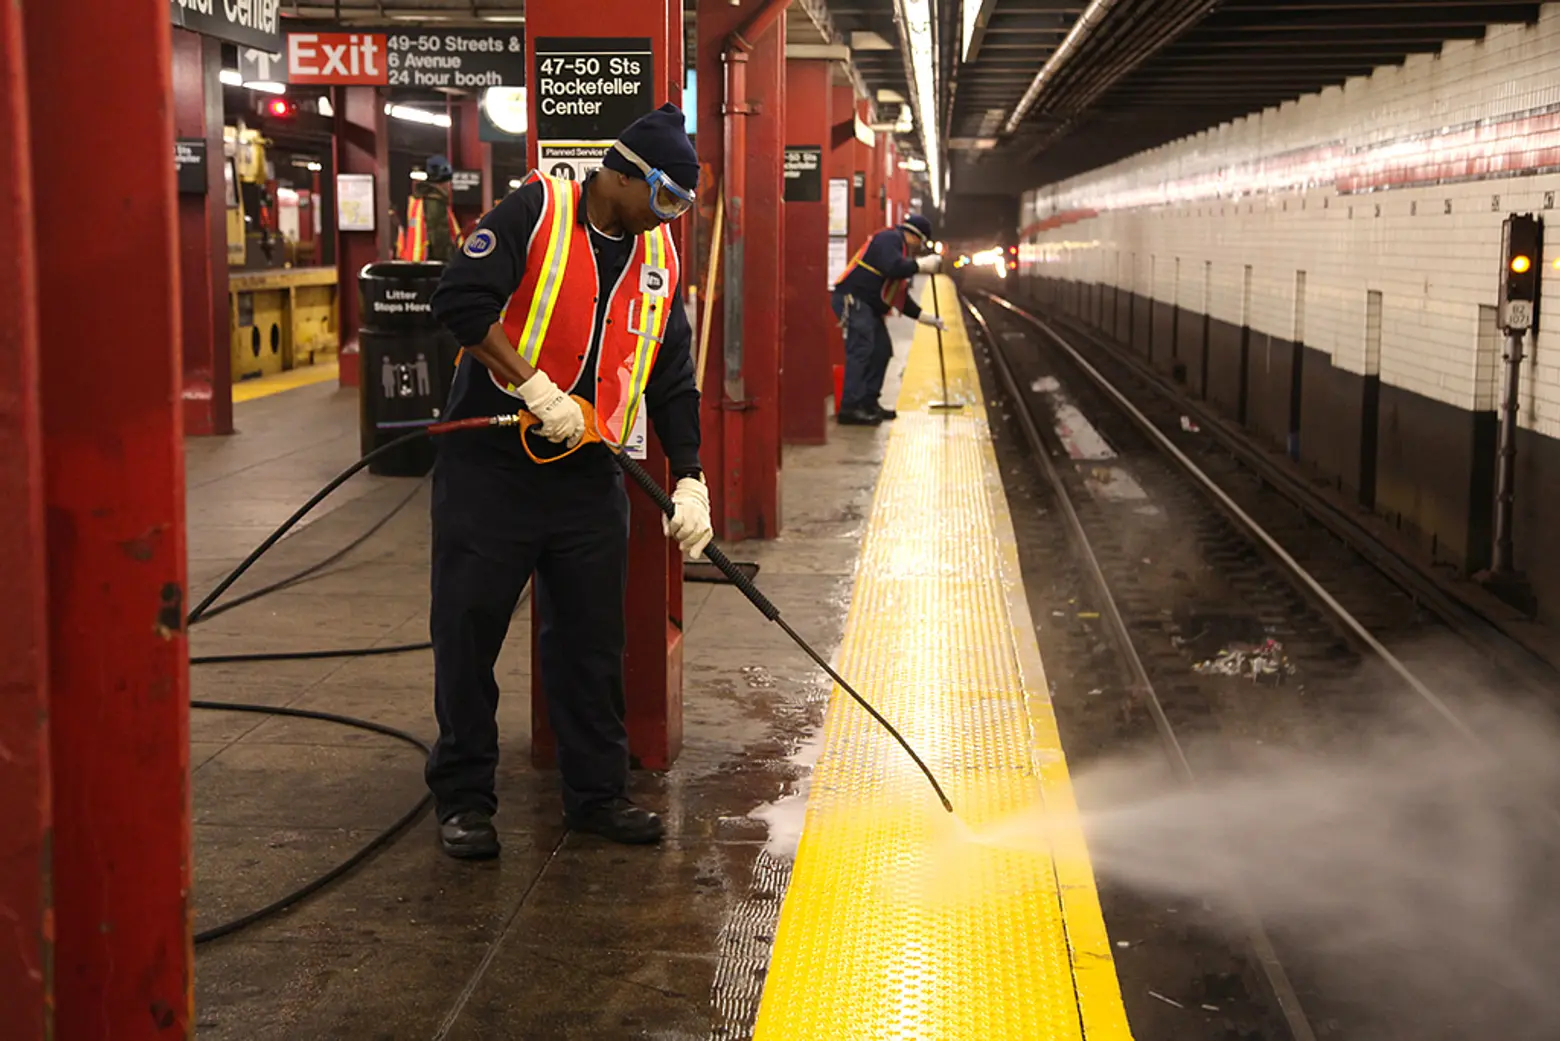 MTA is paying outside contractors $9.5M to deep clean subway cars and stations